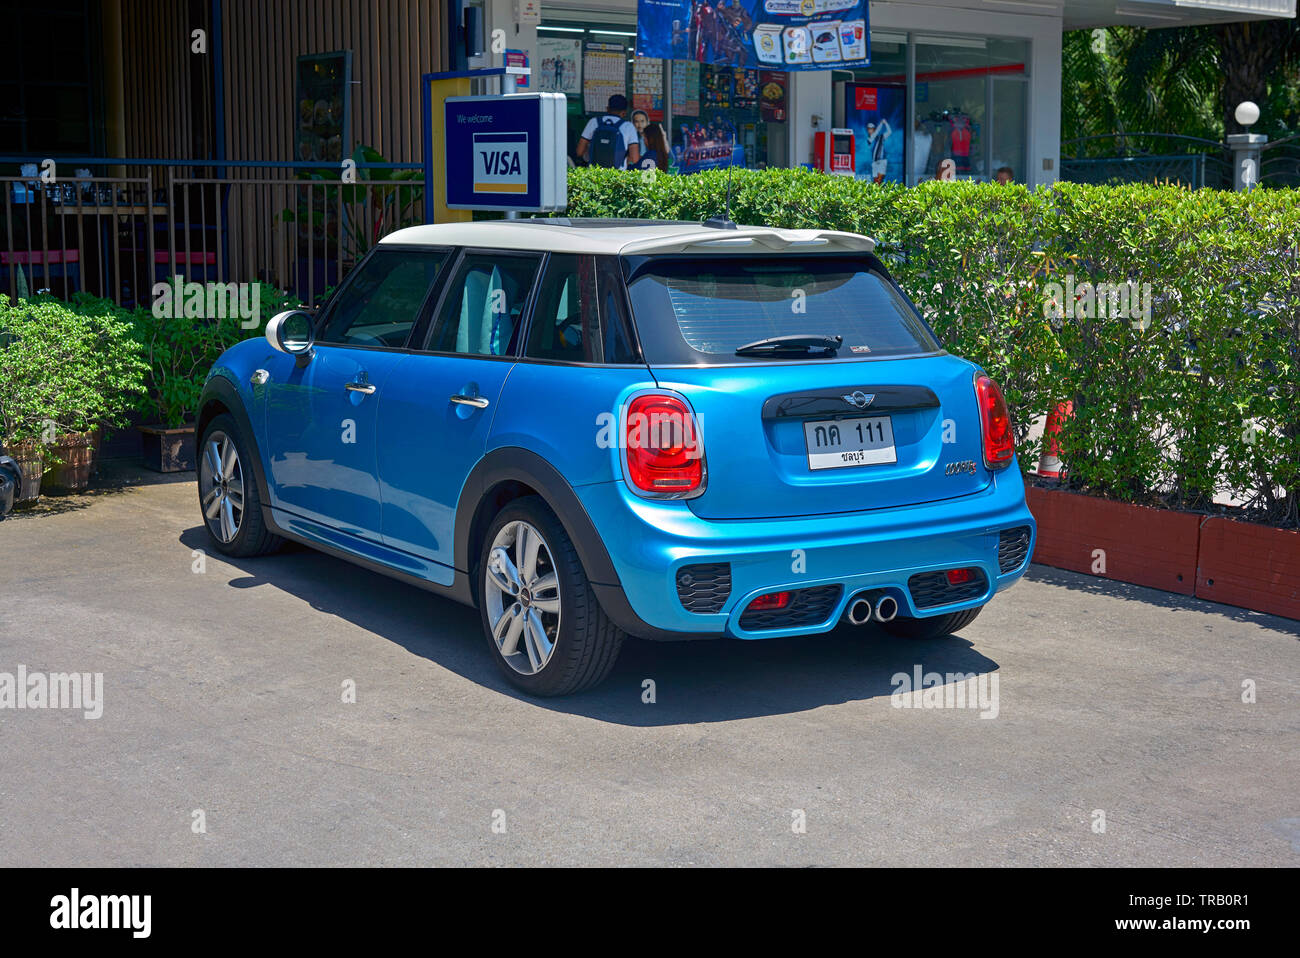 Mini Cooper S in blue with Thailand  Number plate 111 Stock Photo